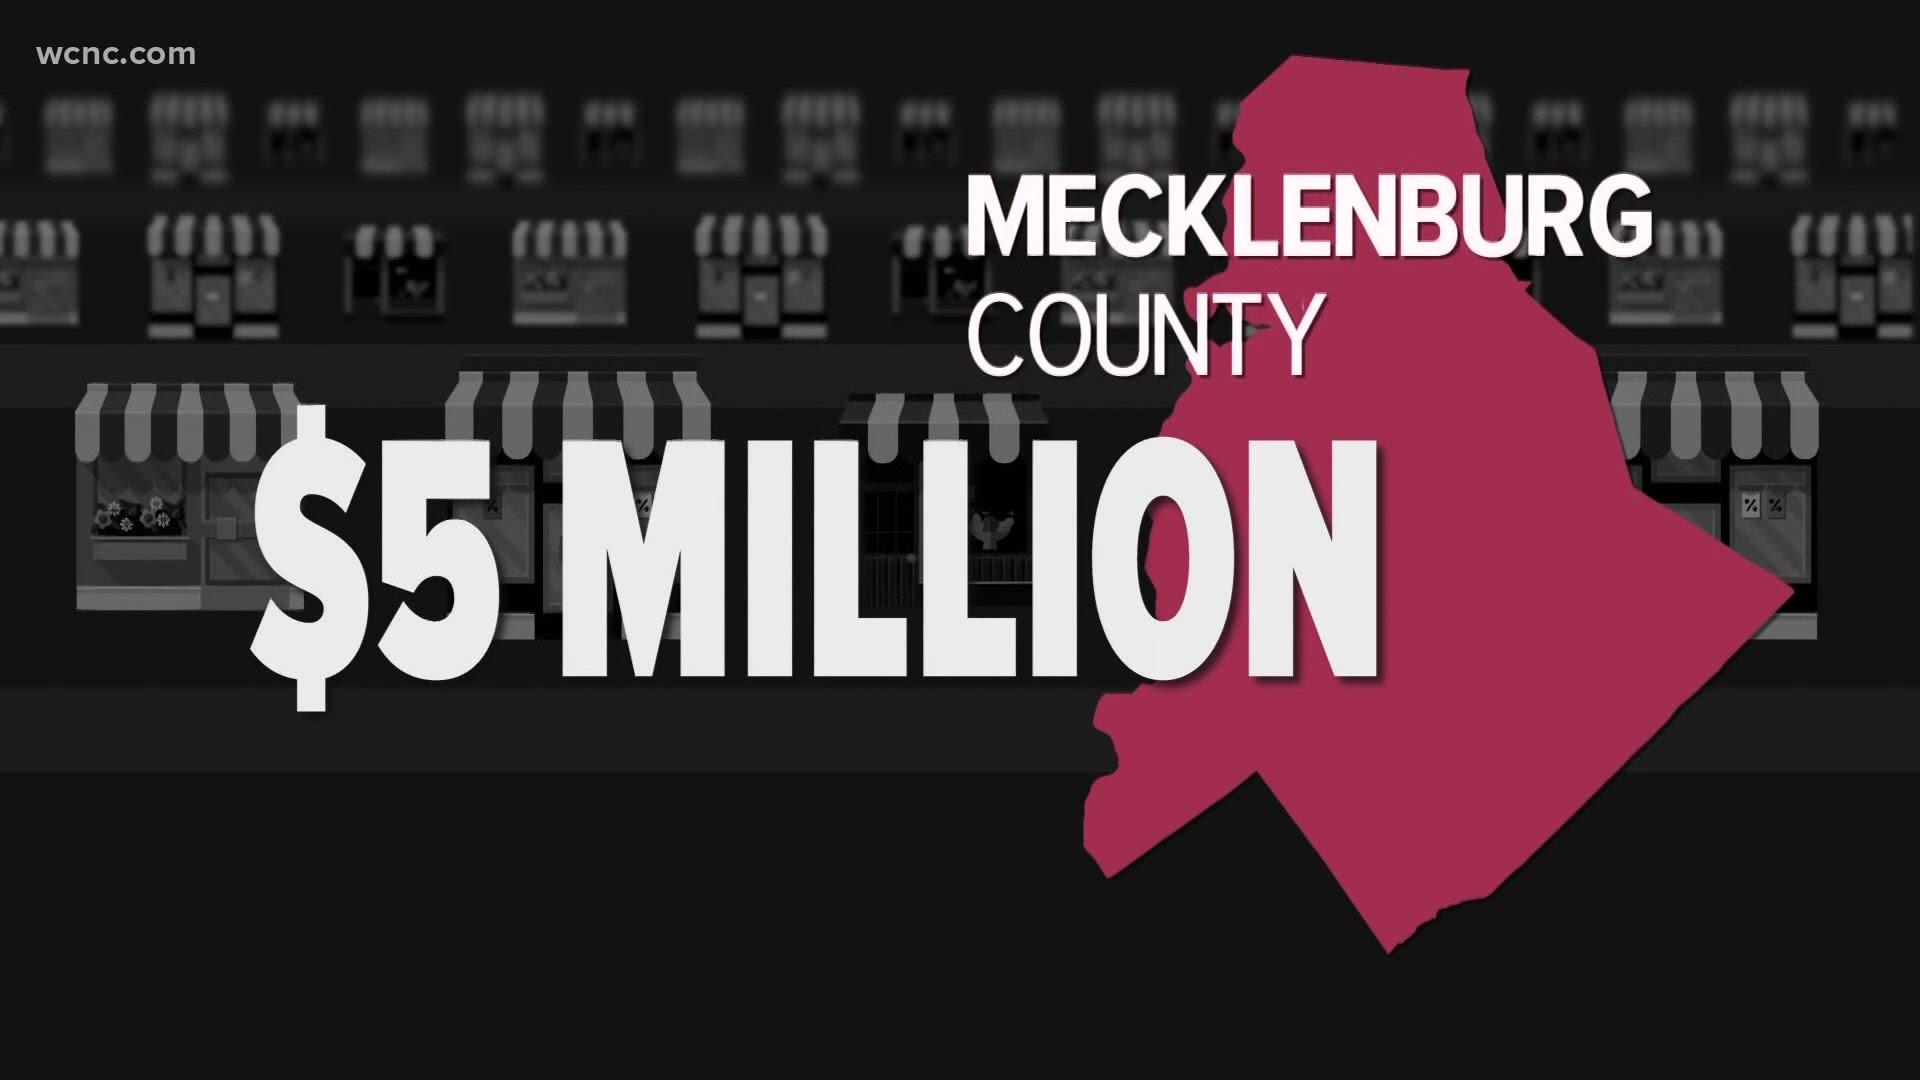 After months of investigating, WCNC Charlotte has discovered Mecklenburg County doesn't know which small businesses received $5 million in taxpayer-backed loans.